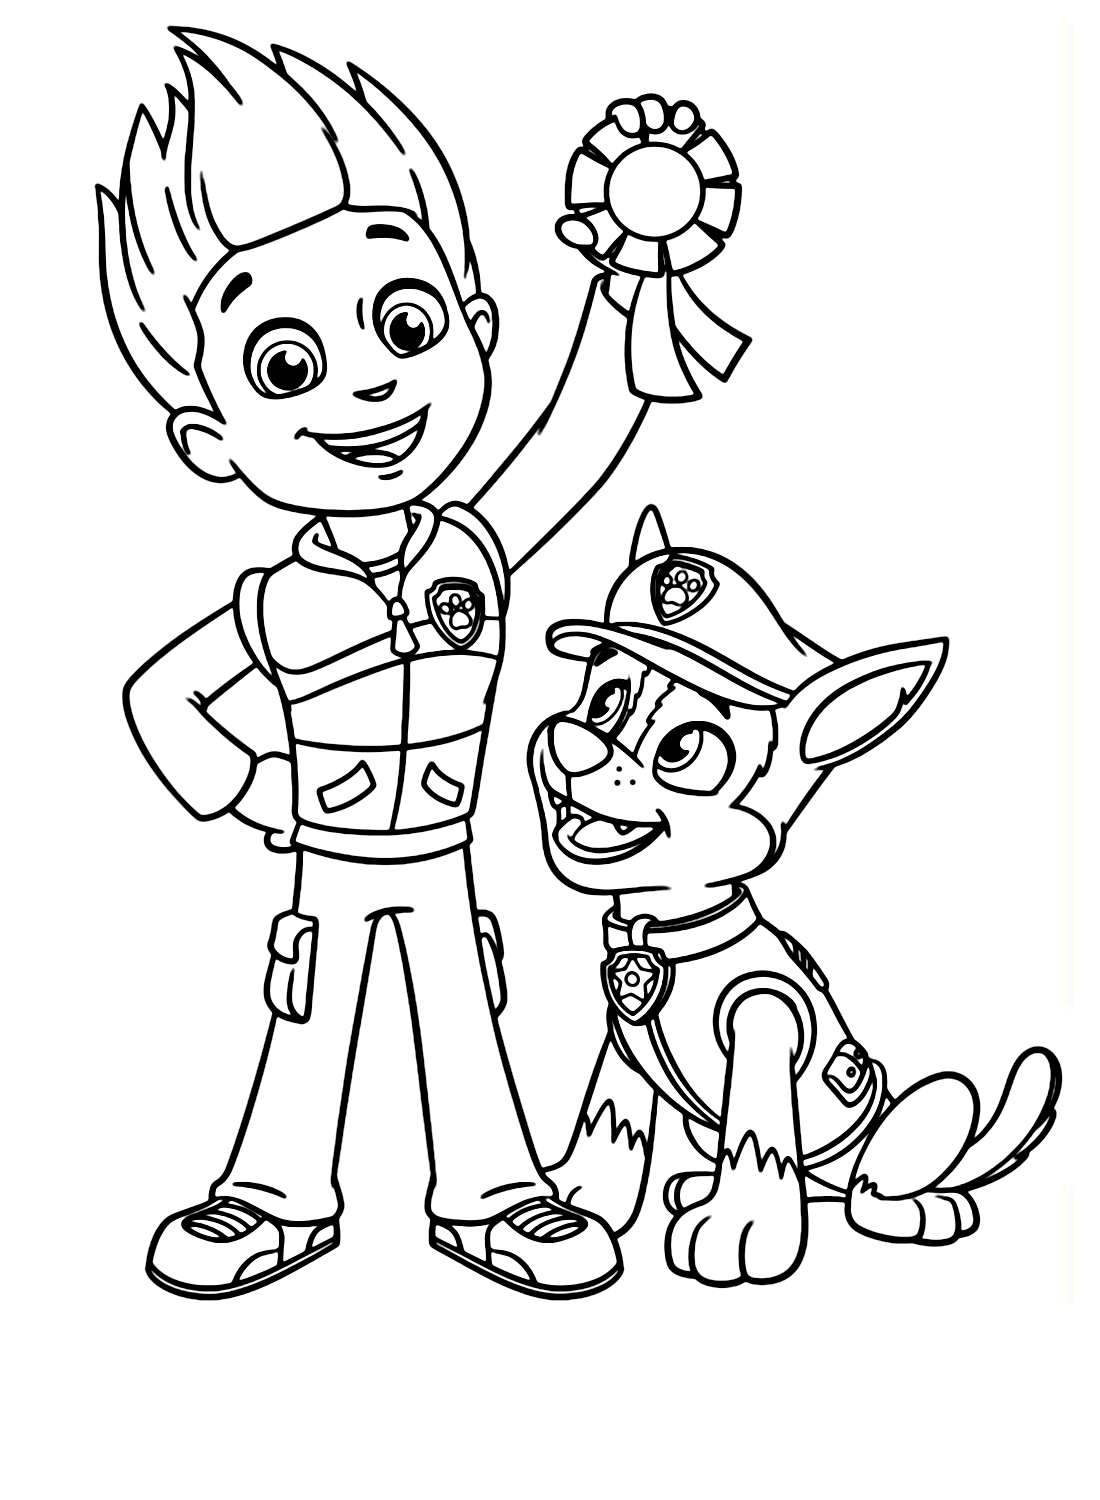 Ryder with Chase Paw Patrol Coloring Pages